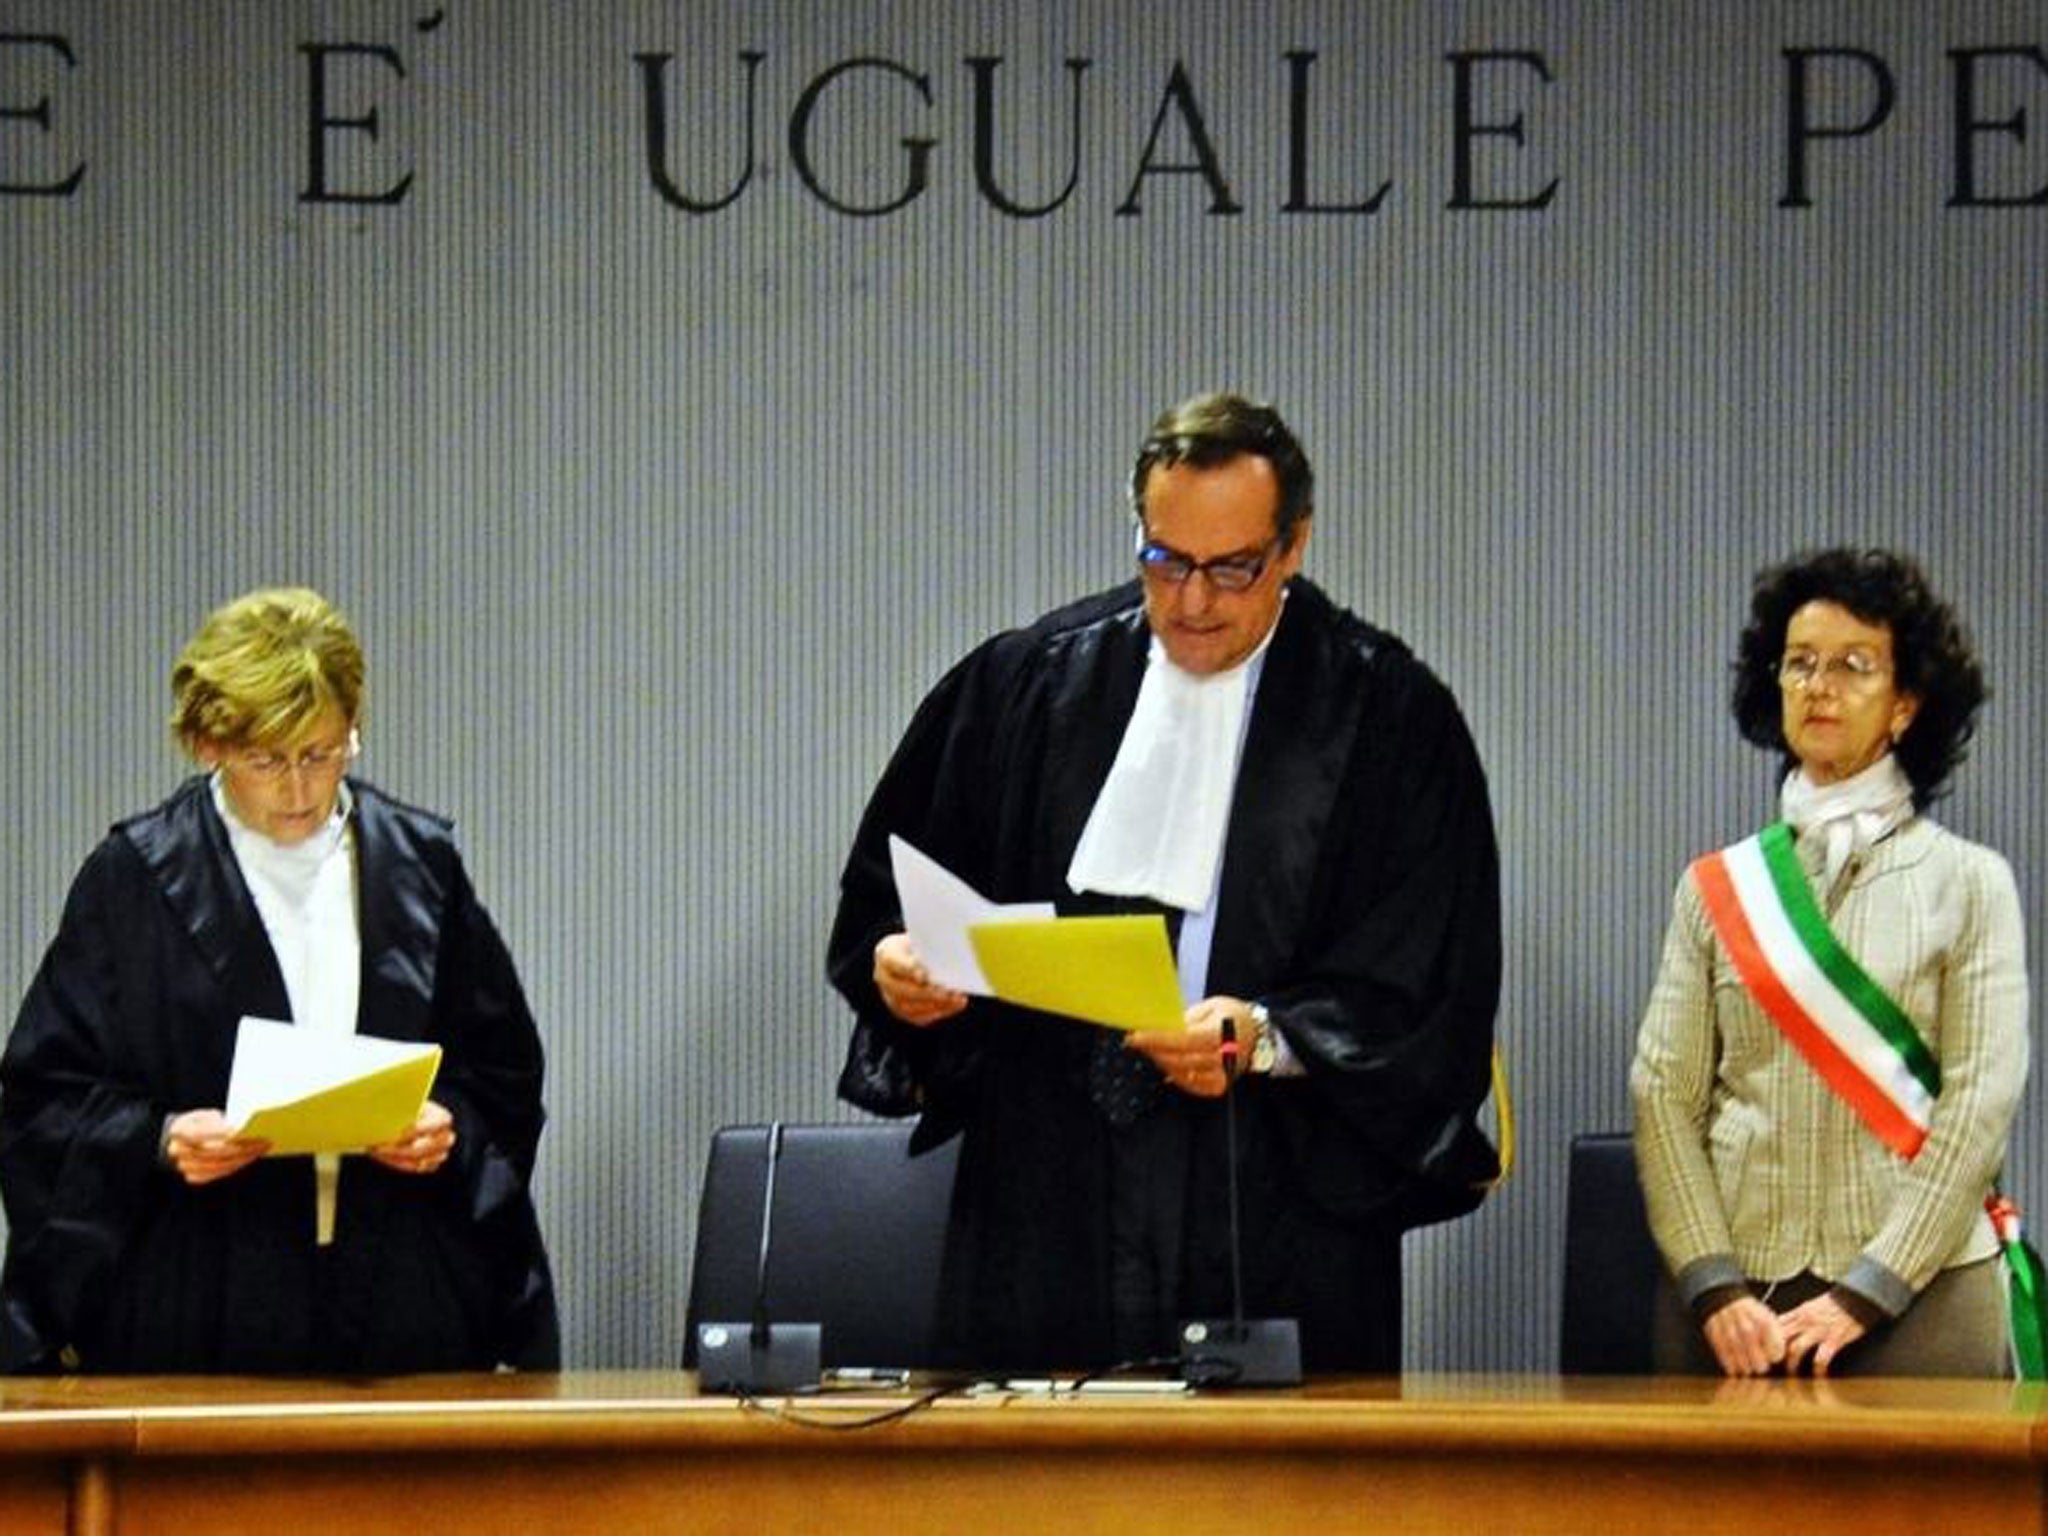 The presiding judge Alessandro Nencini (C) reads the judgment of the Court of Appeals for the verdict of the Amanda Knox and Raffaele Sollecito retrial, Florence, Italy